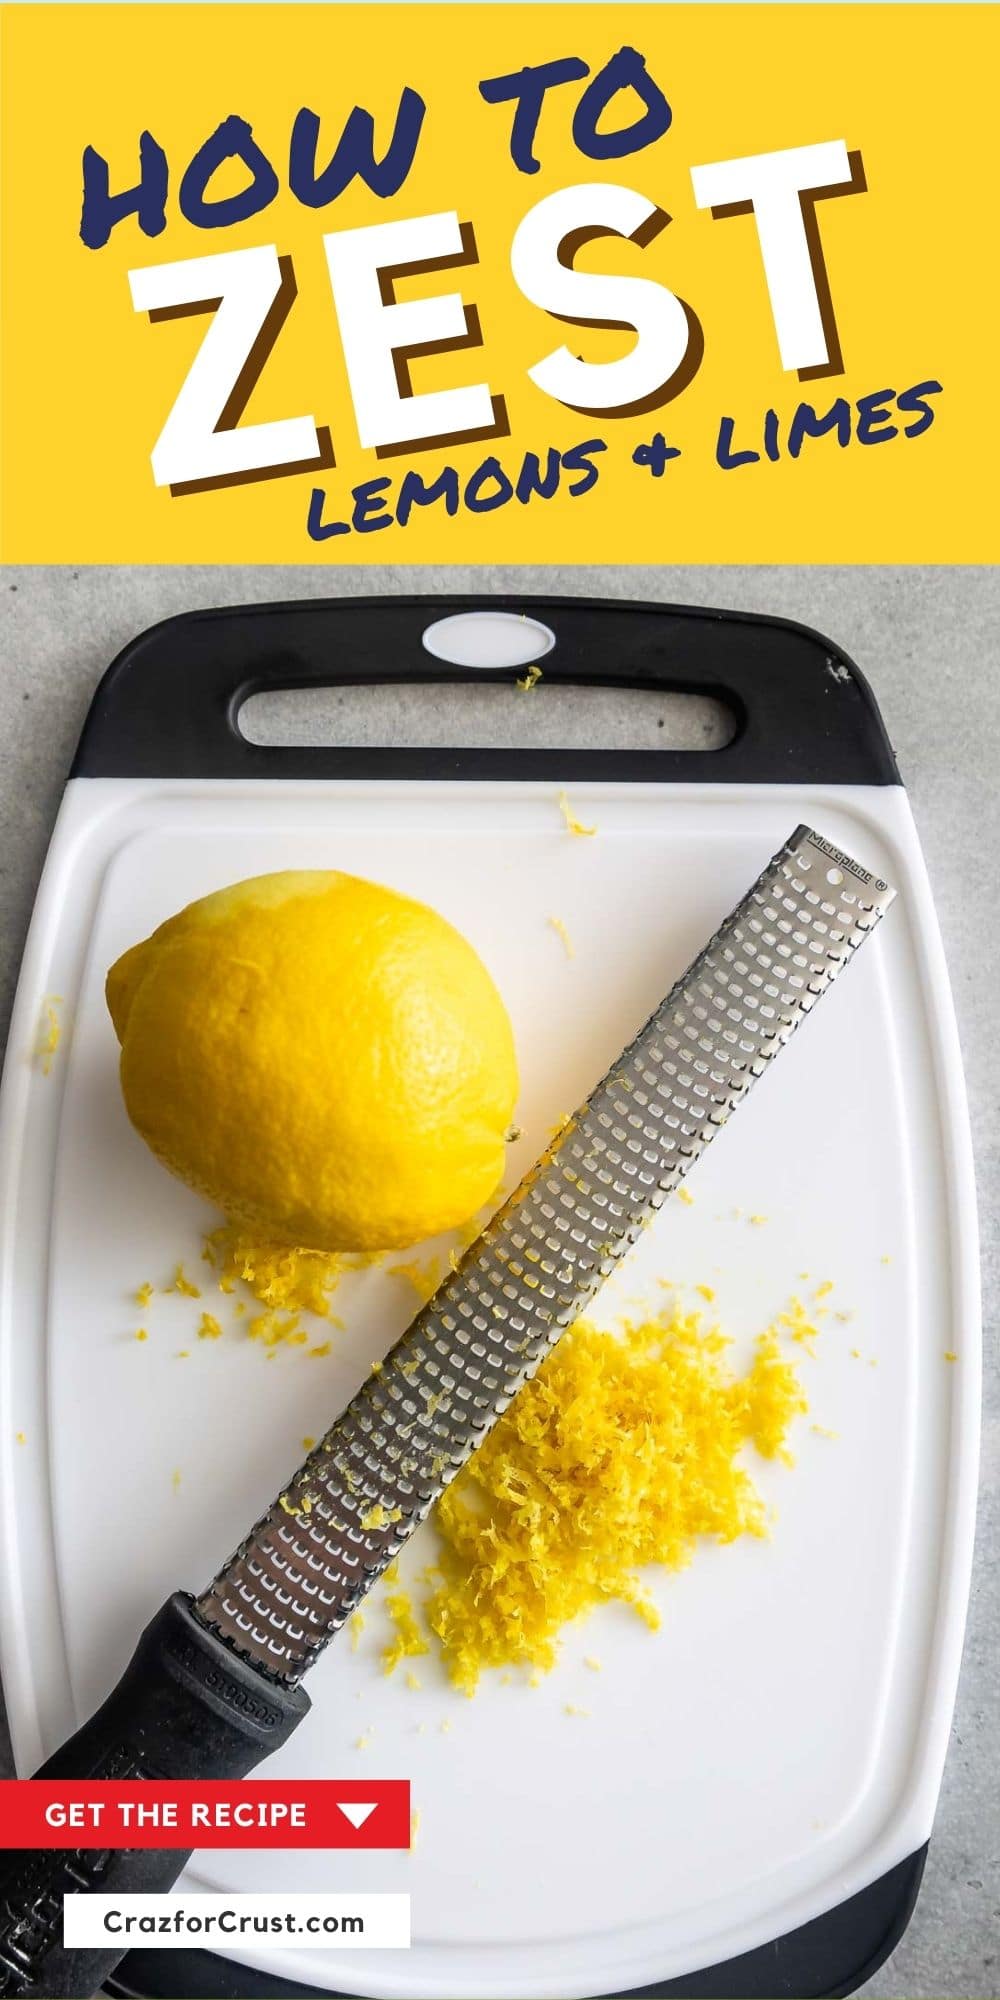 Learn How to Zest a Lemon easily! - Crazy for Crust